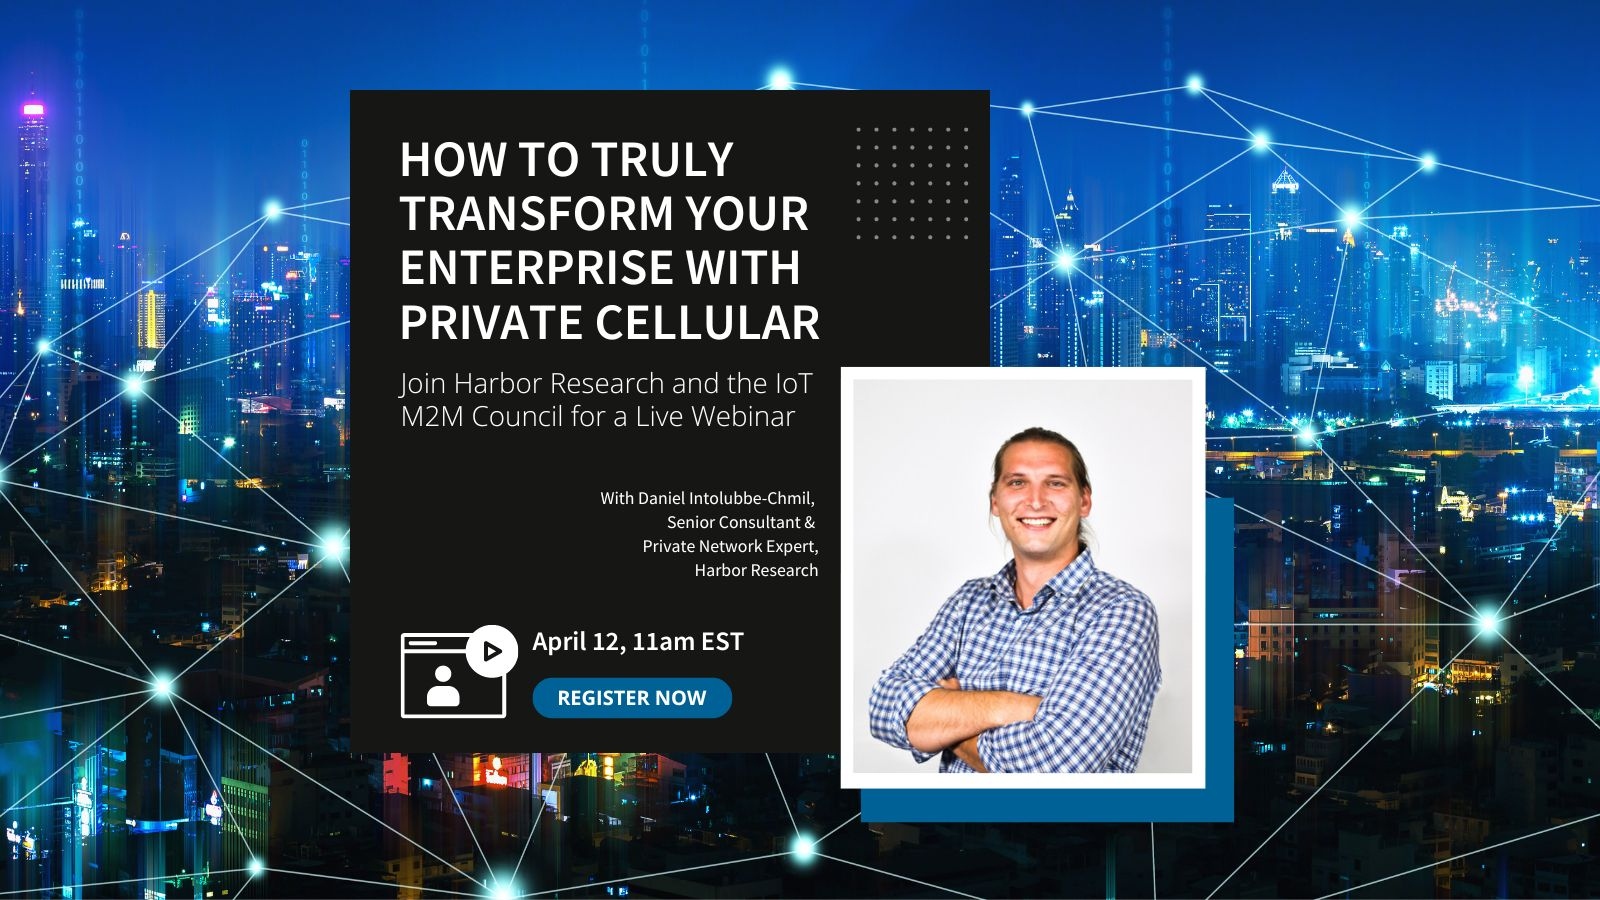 How to truly transform your enterprise with private cellular | GXC webinar promo